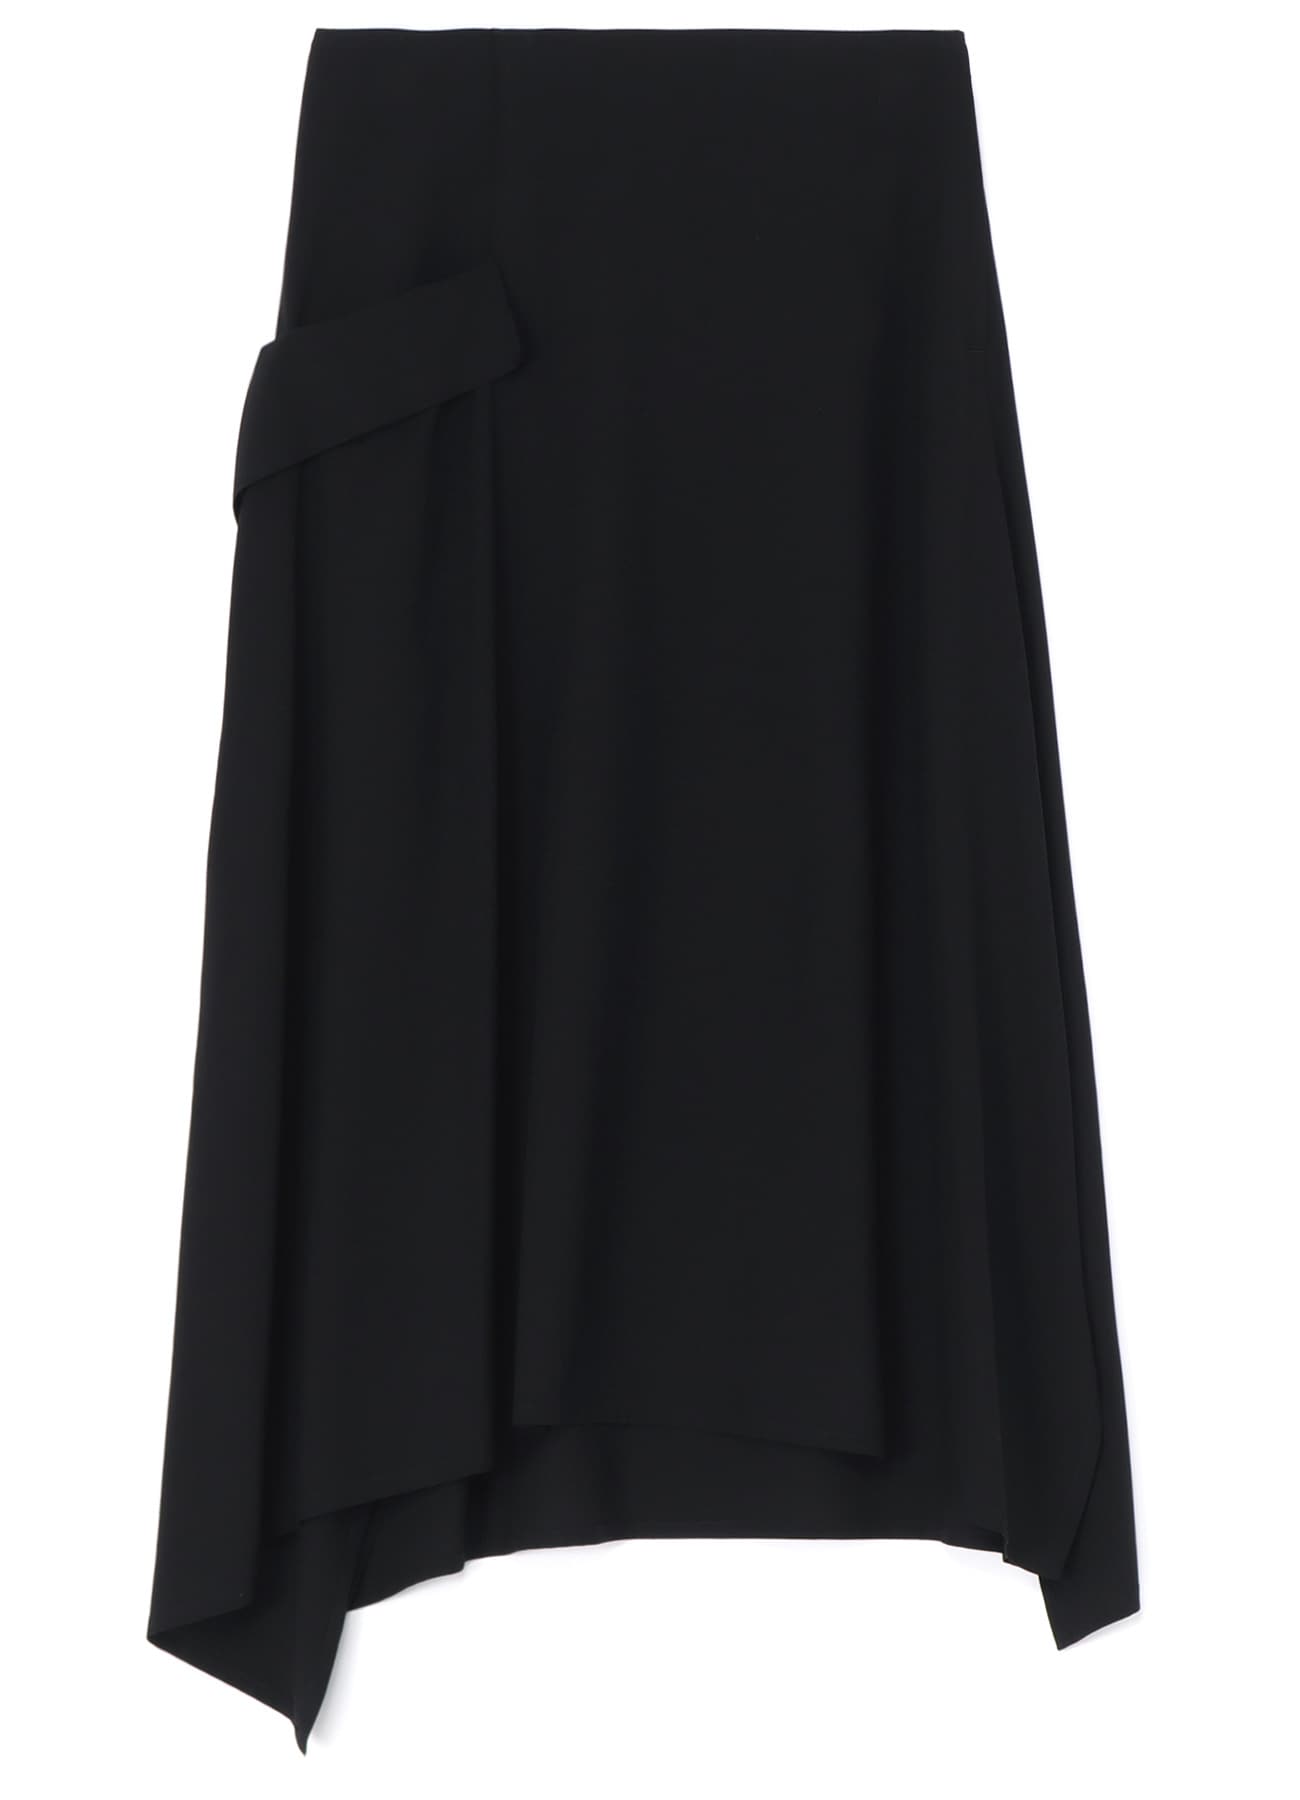 RAYON BROAD RIGHT CROPPED PANTS SKIRT(XS Black): Y's｜THE SHOP 